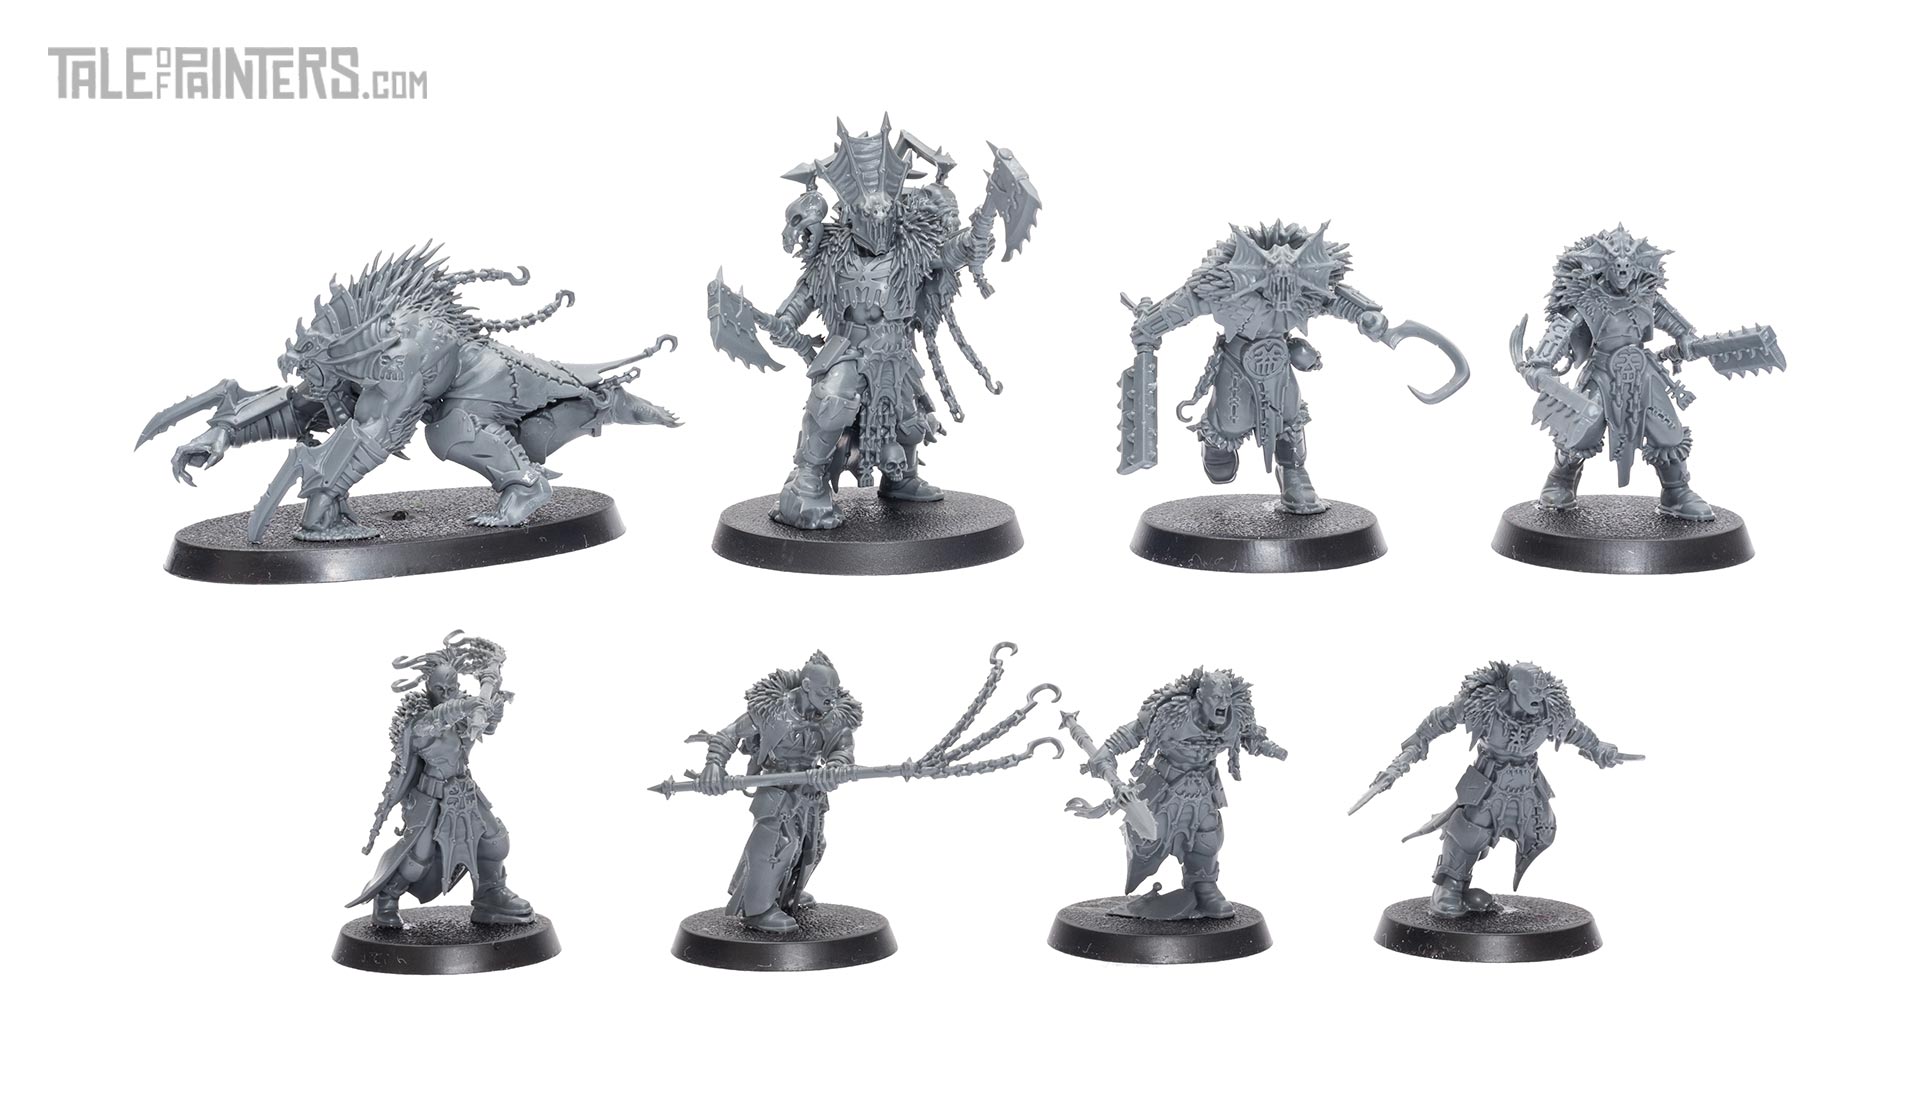 Claws of Kharanak from Warcry Bloodhunt assembled and reviewed